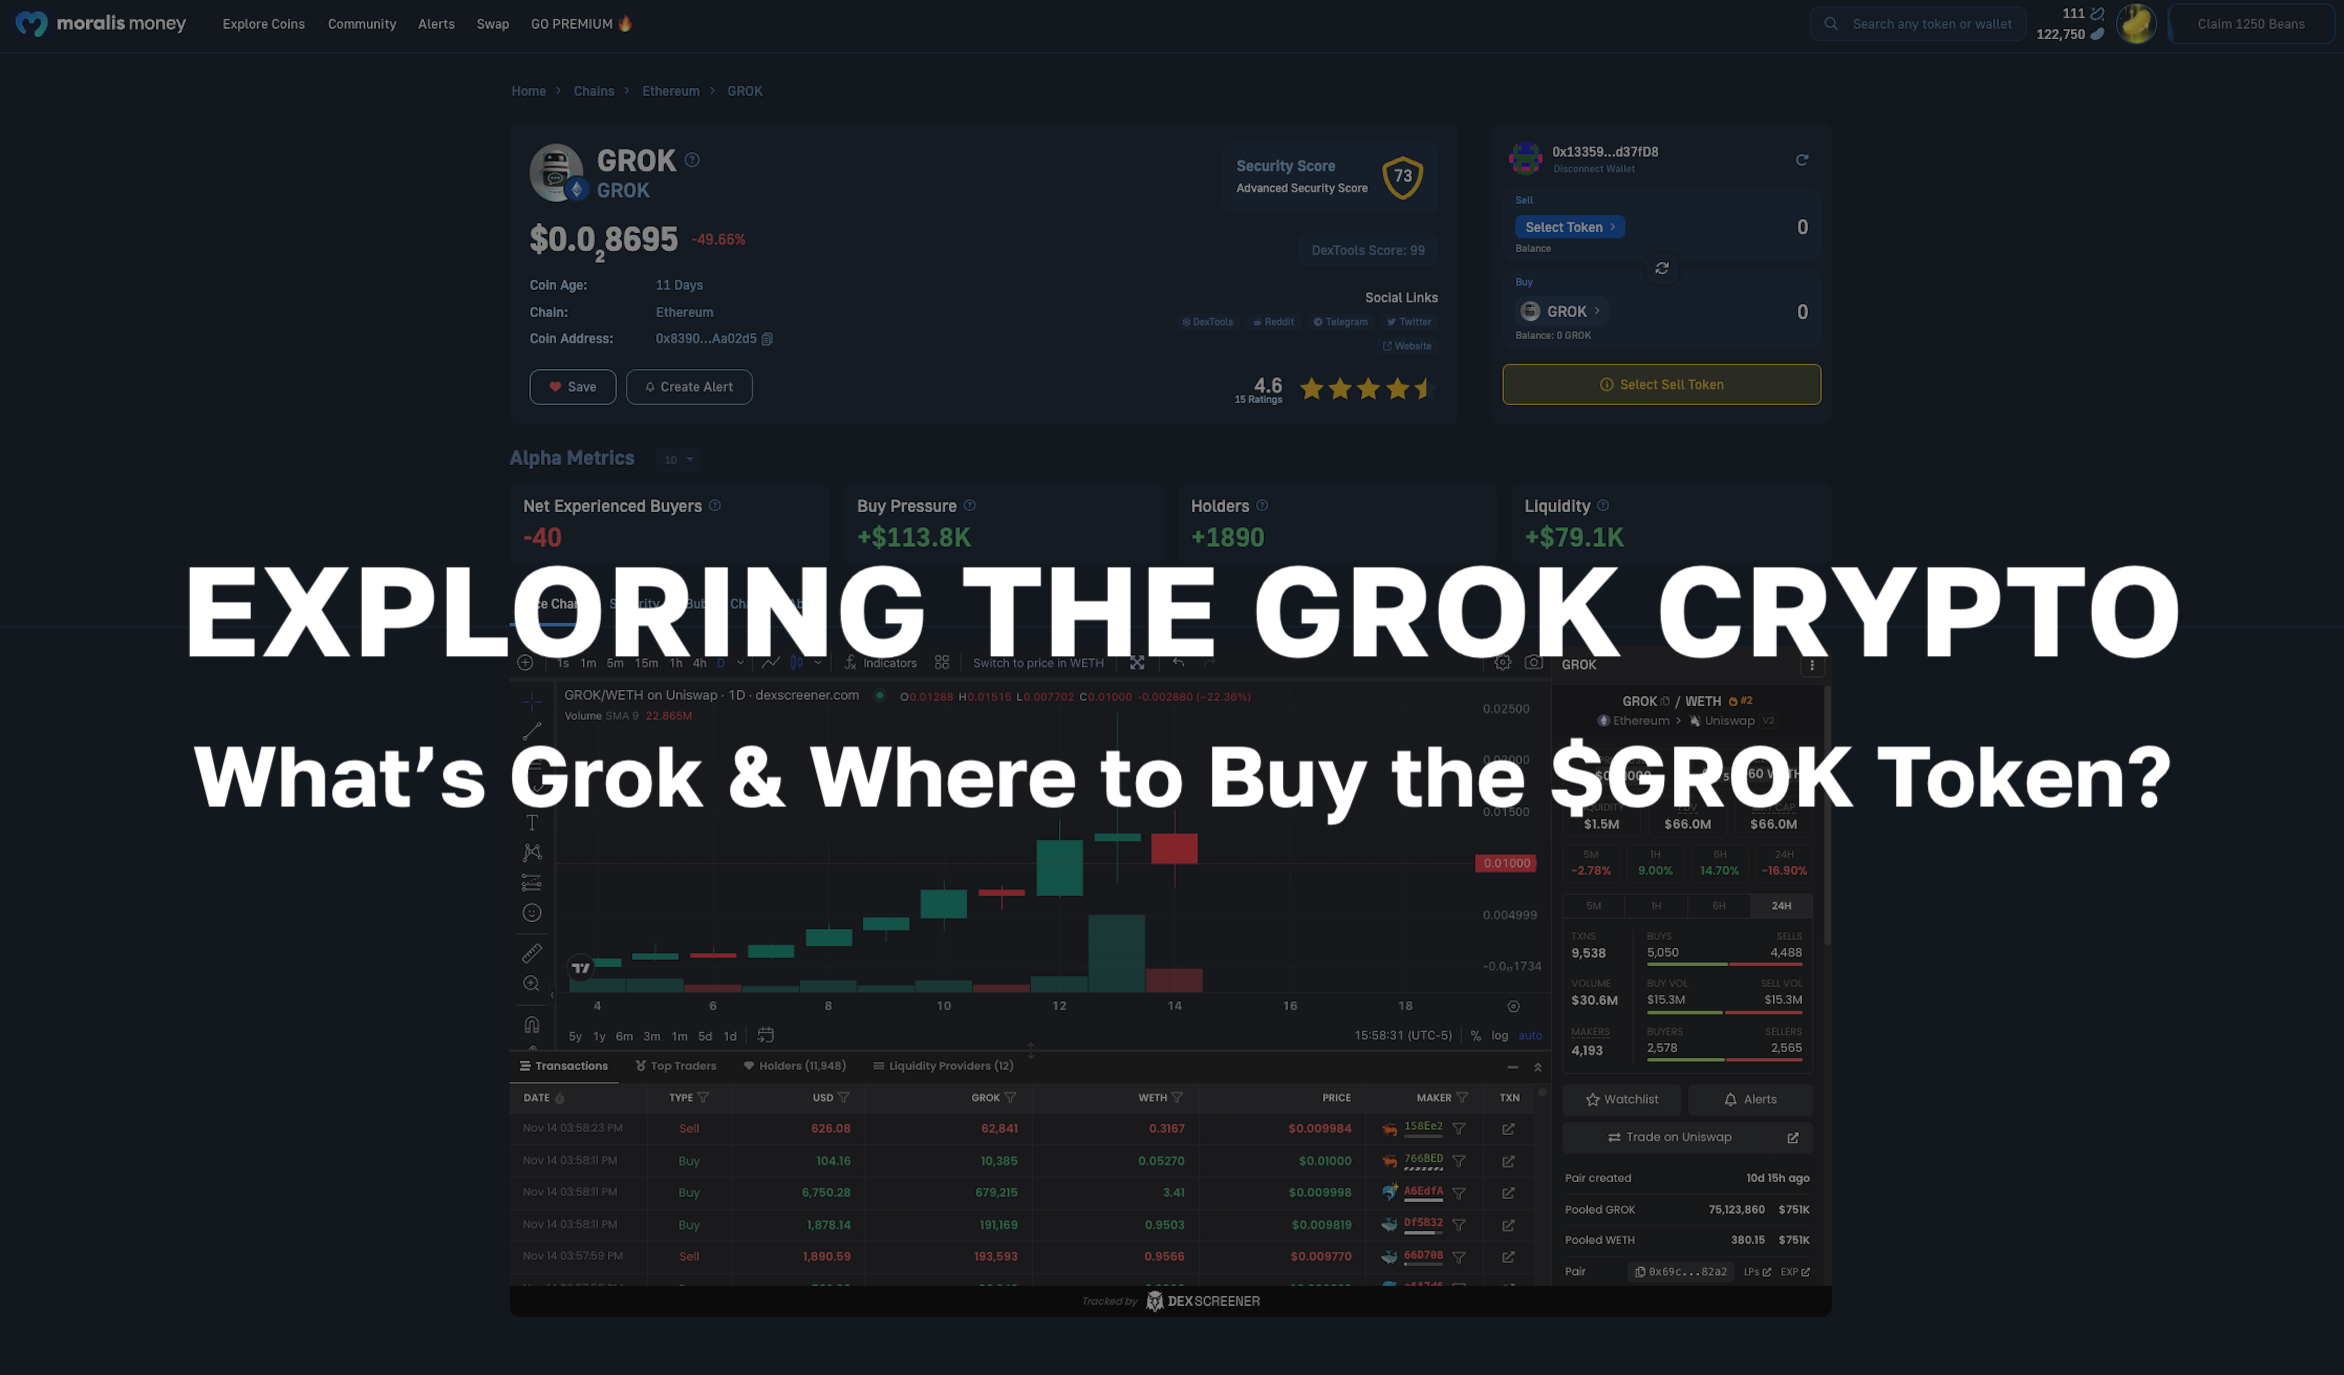 Grok Crypto - What is Grok & Where to Buy the $GROK Token?